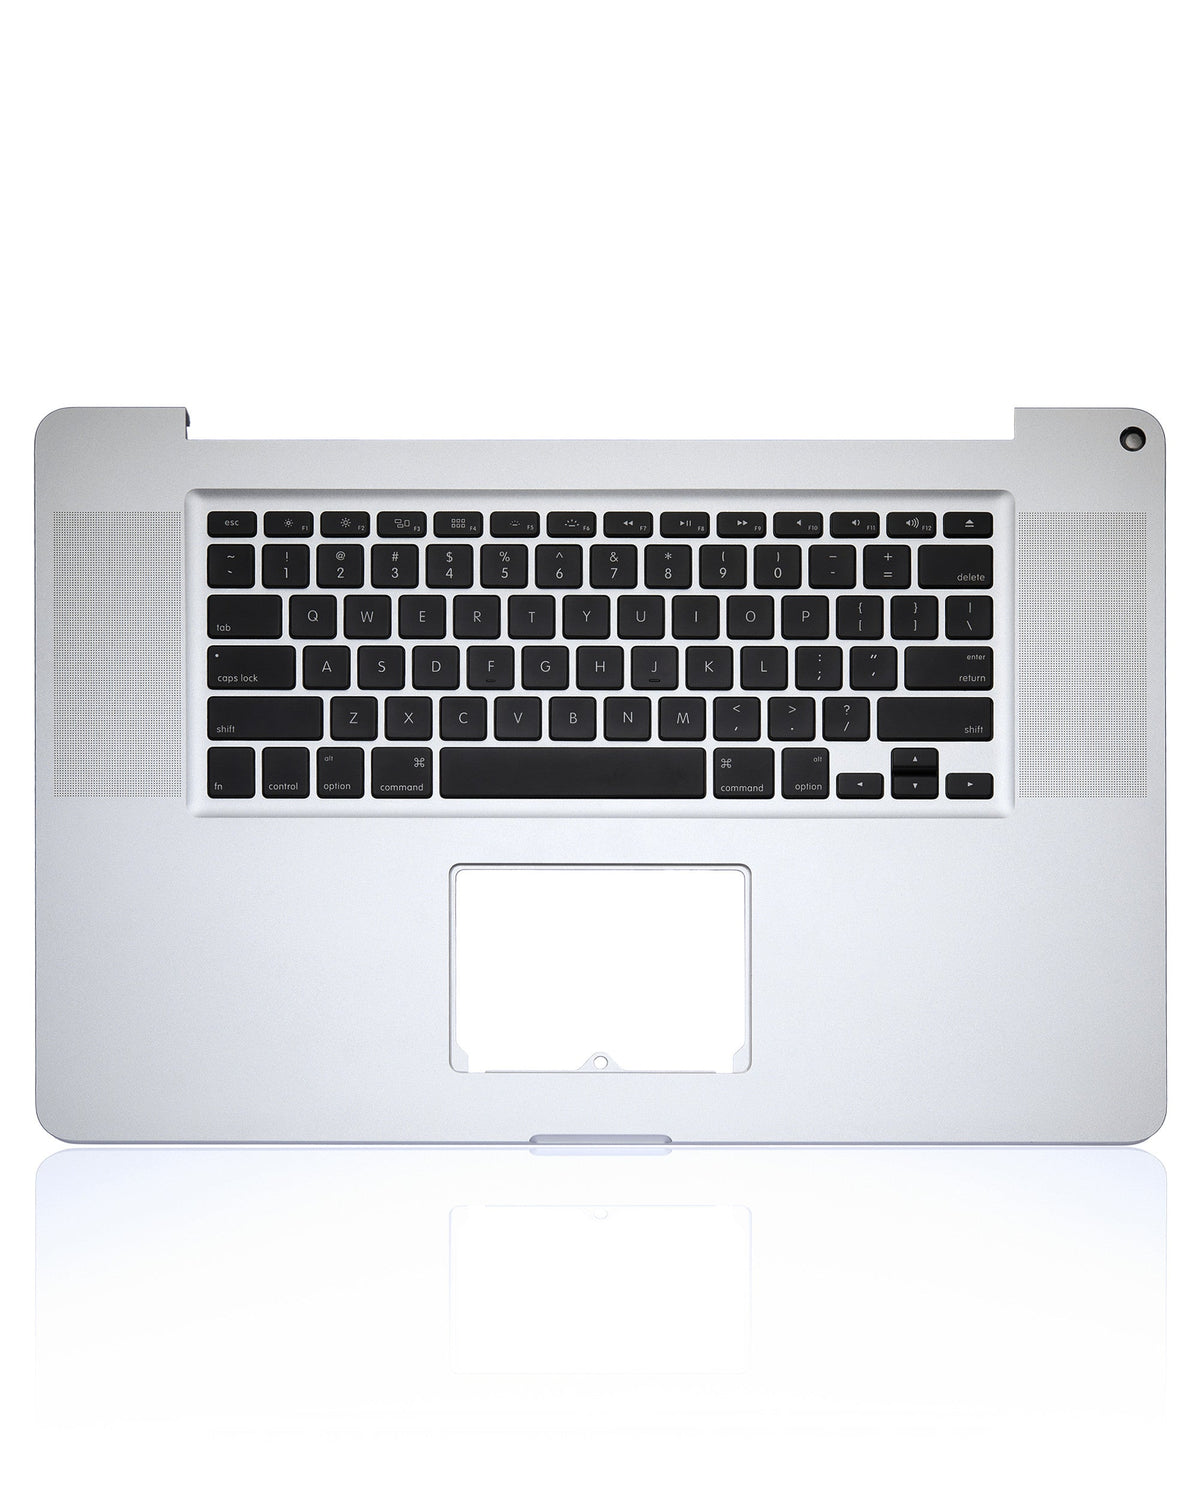 TOP CASE AND KEYBOARD (US ENGLISH) FOR MACBOOK PRO UNIBODY 17" A1297  (EARLY 2009 / MID 2009)